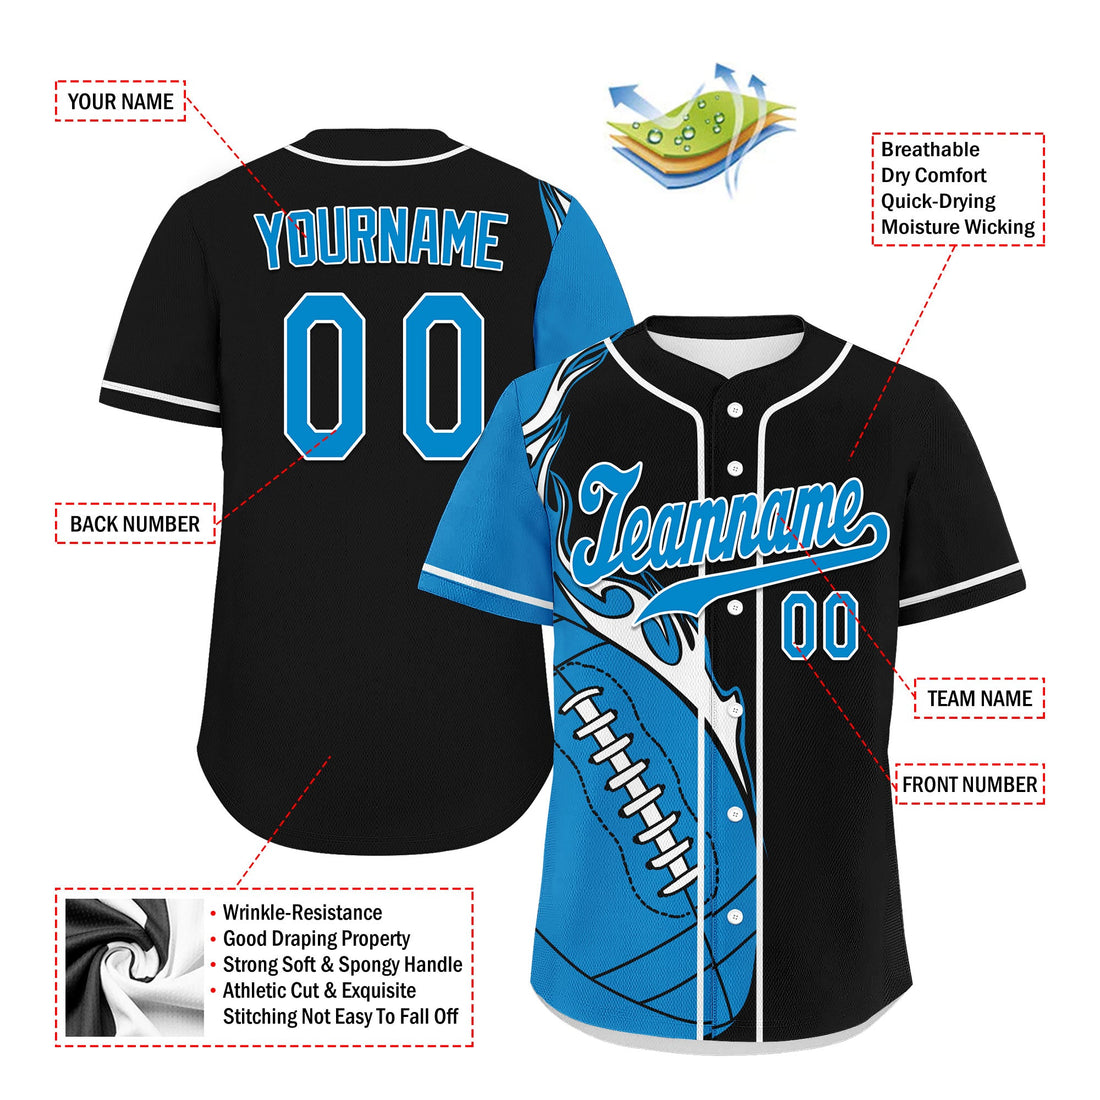 Custom Black Blue Classic Style Personalized Authentic Baseball Jersey UN002-D0b0a00-f